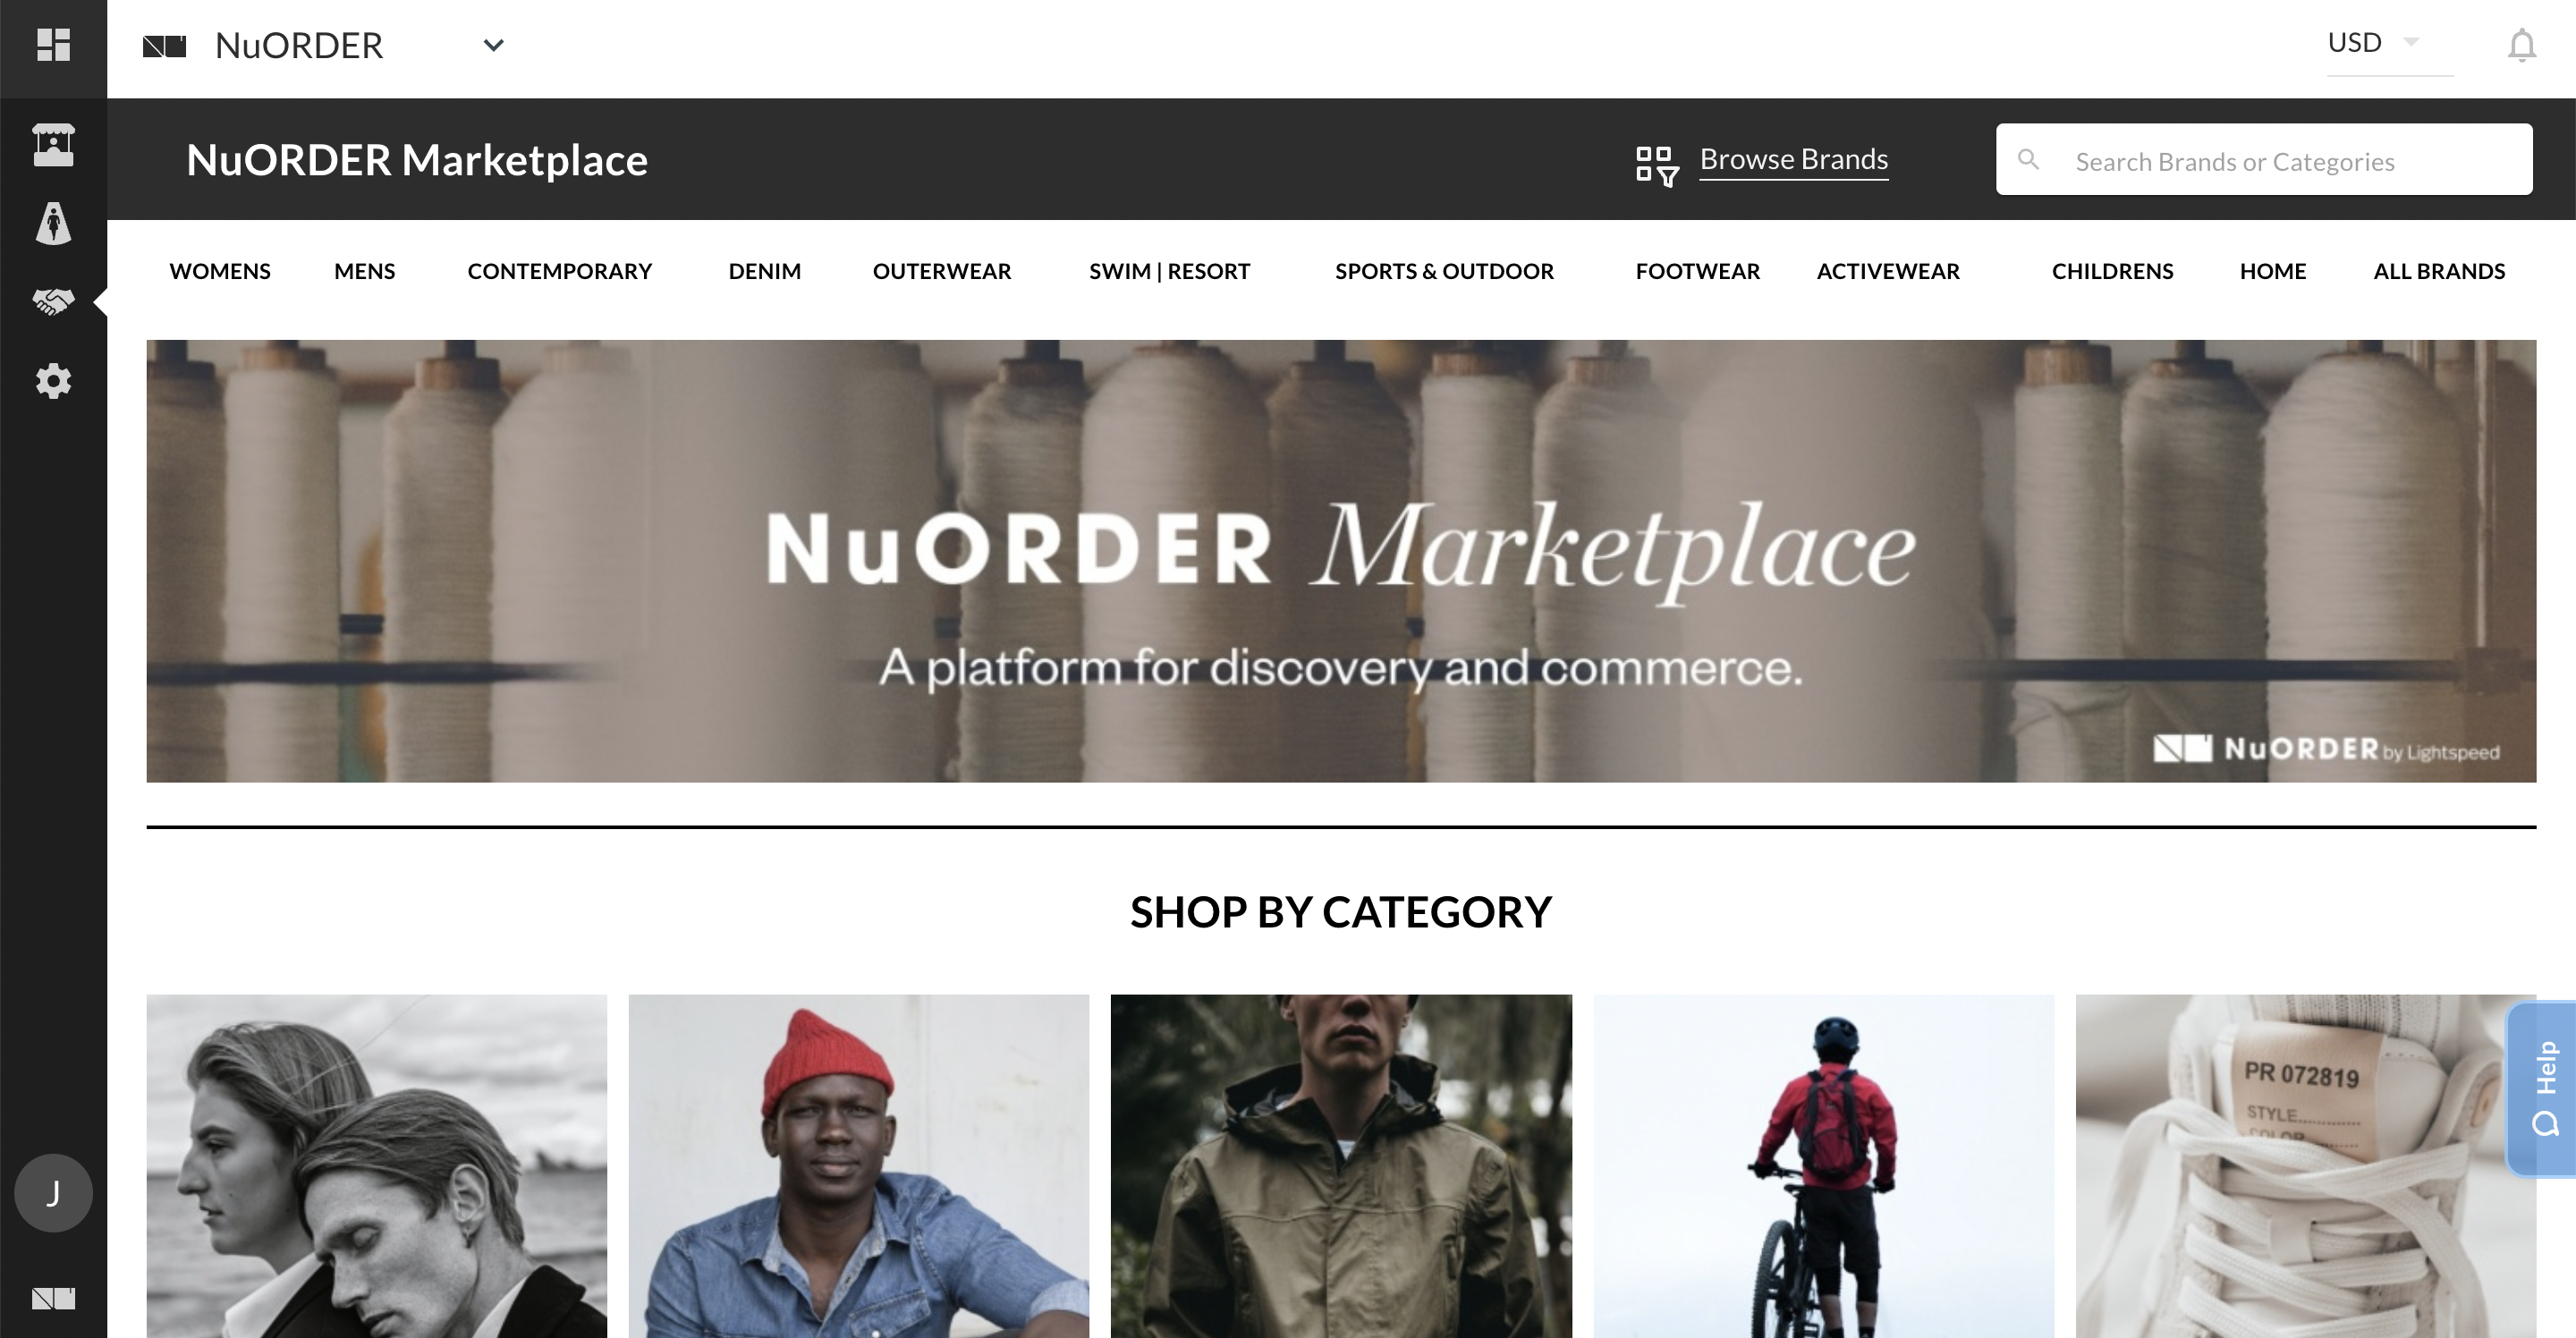 NuORDER-Marketplace.png